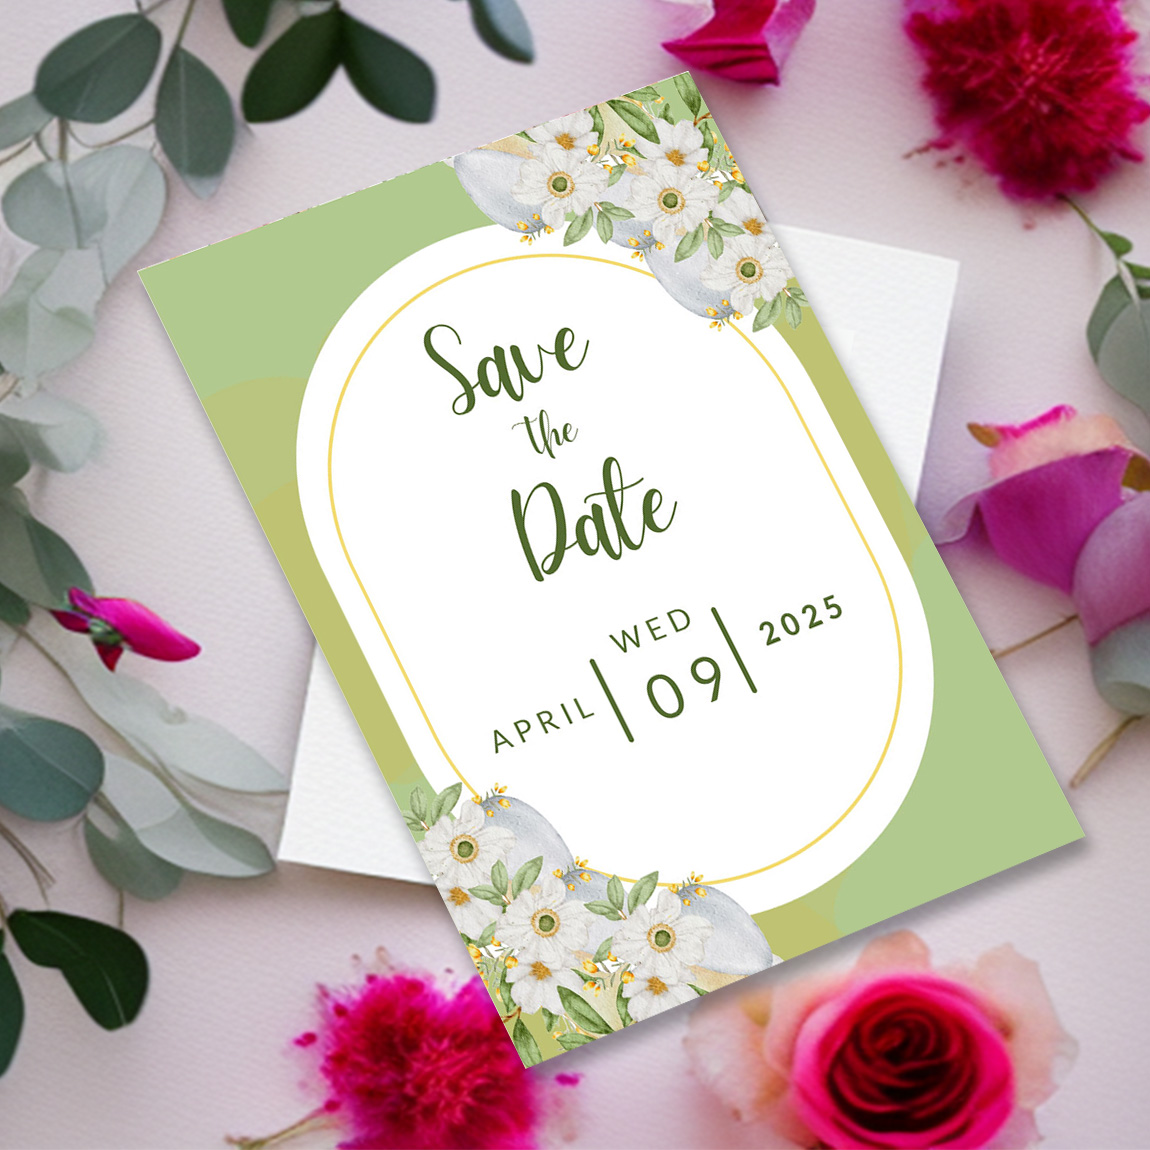 Image with charming wedding invitation in light green colors with white flower.